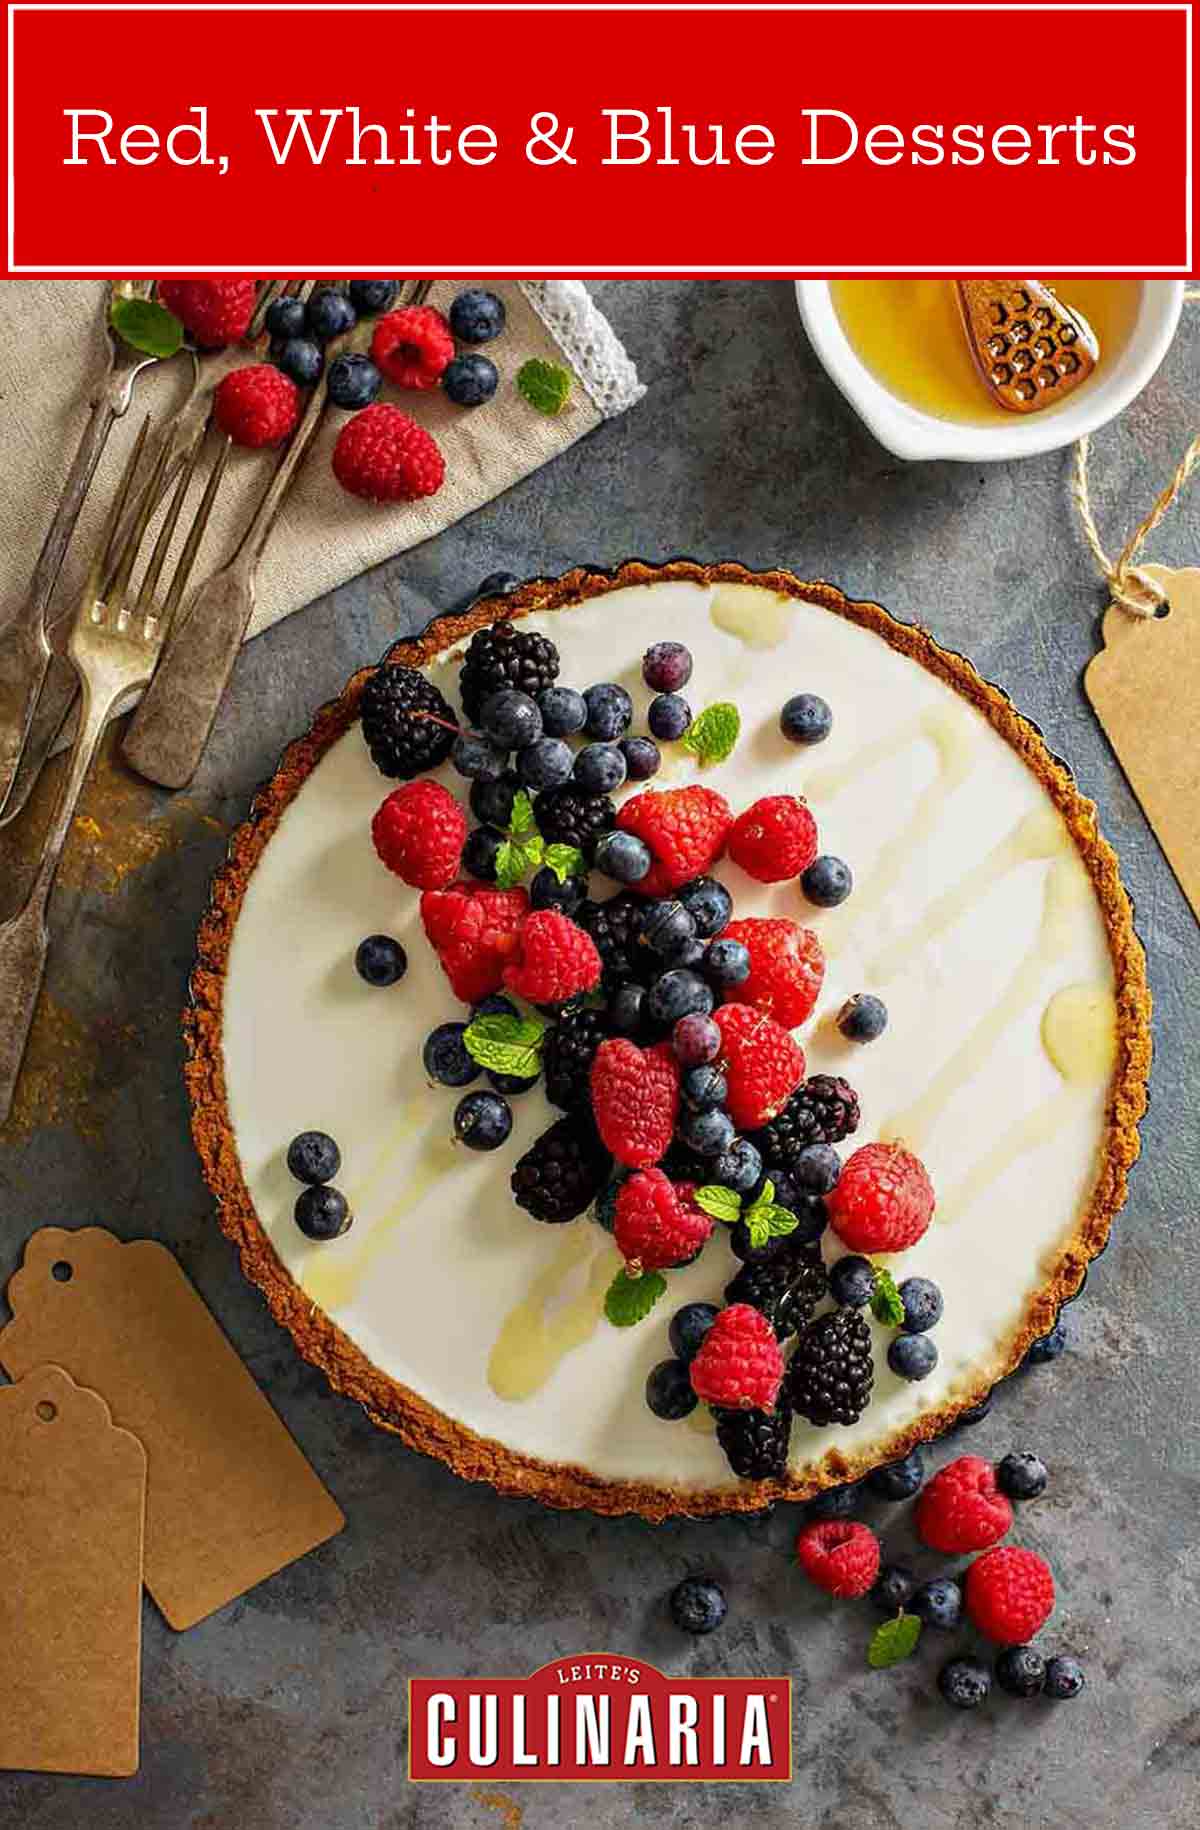 A cheesecake tart with a graham cracker crust and assorted fresh berries on top, a dish of honey, and some berries and forks around it.